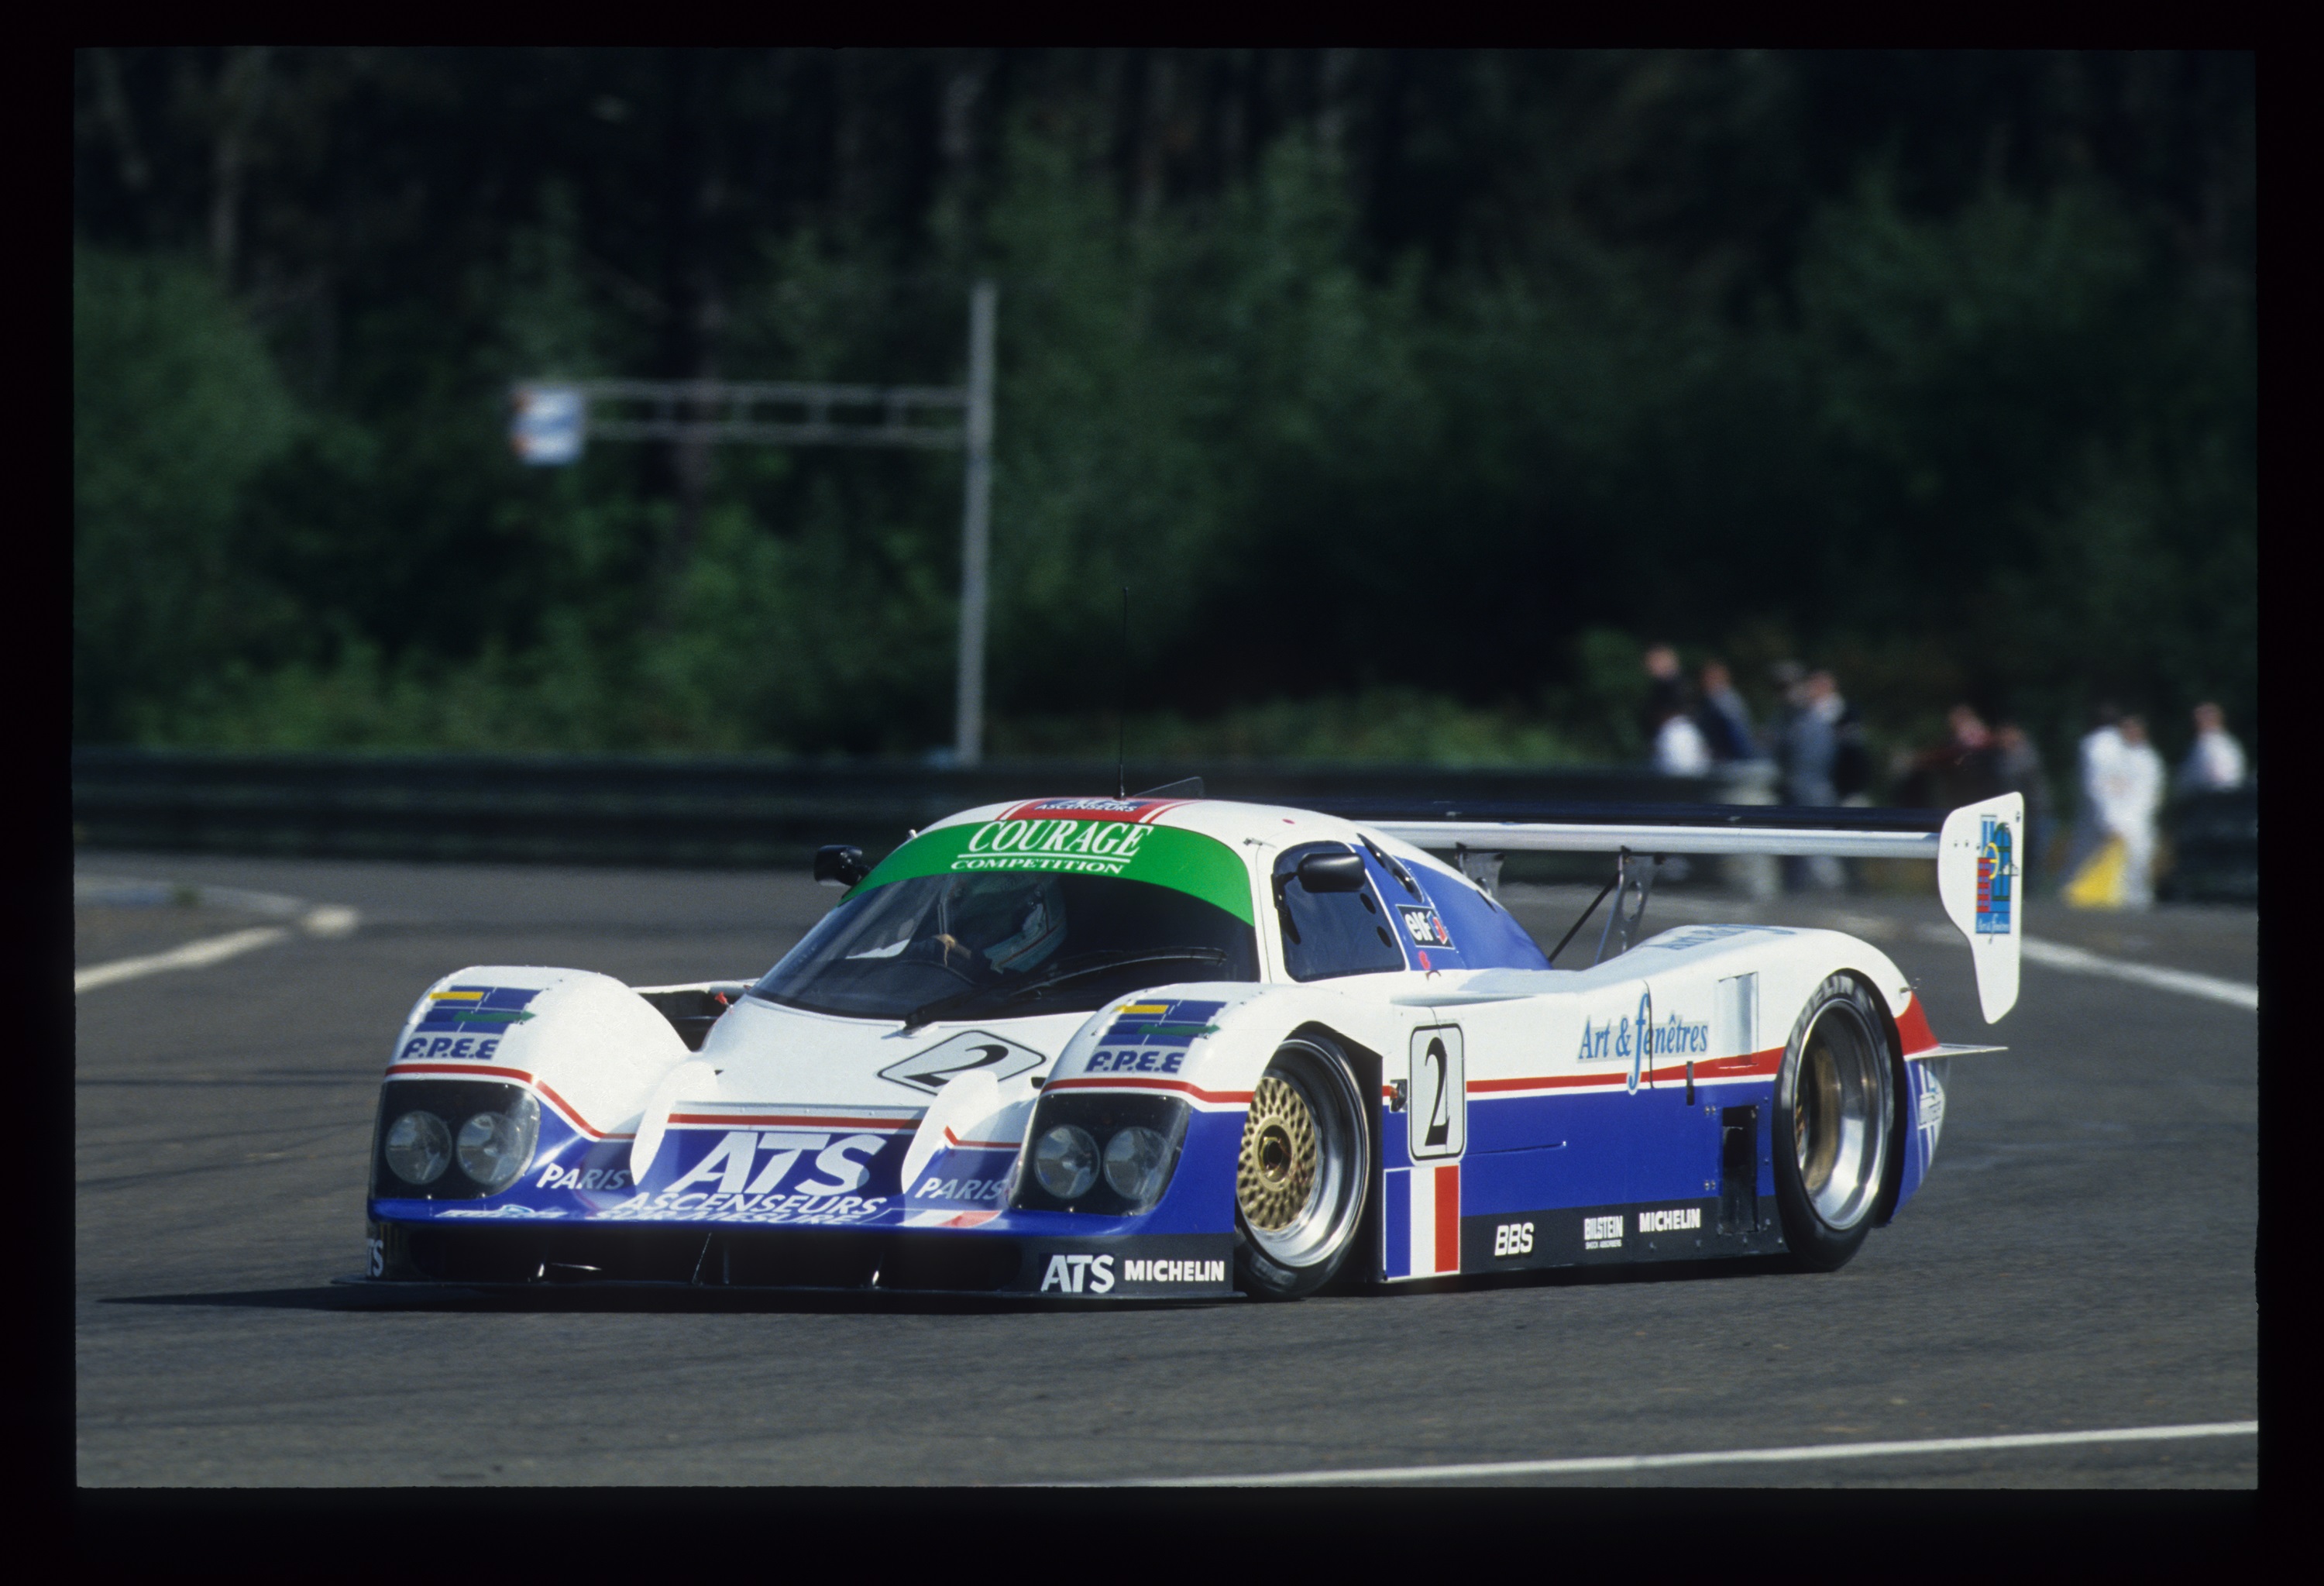 In 1994, Alain Ferté clocked the quickest lap during qualifying at the wheel of this Courage C32 in...03:51.050, the slowest pole in the history of the 24 Hours.